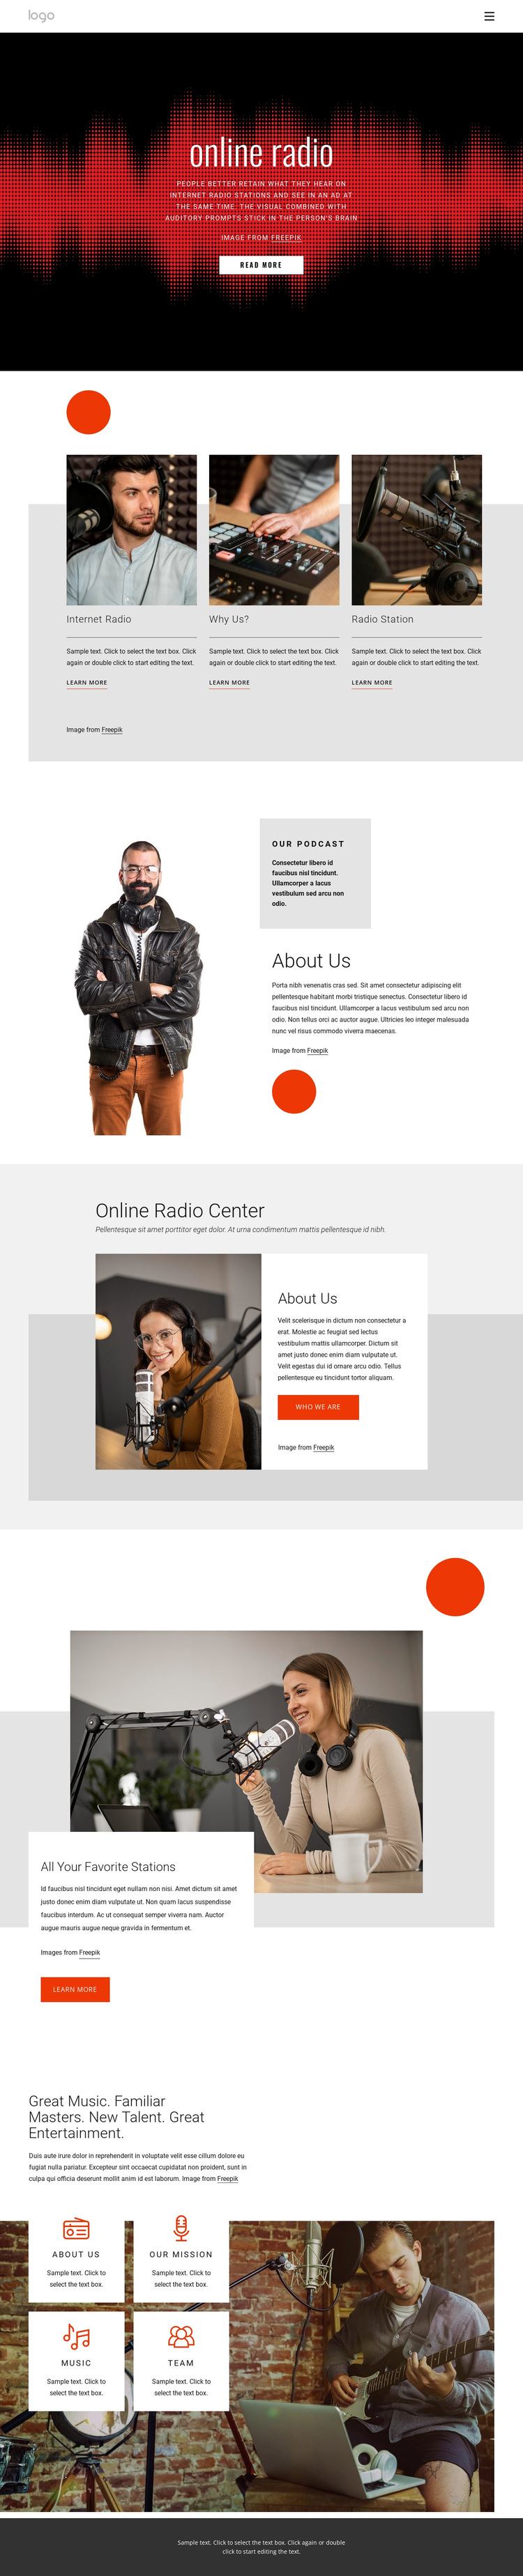 Online radio shows Template